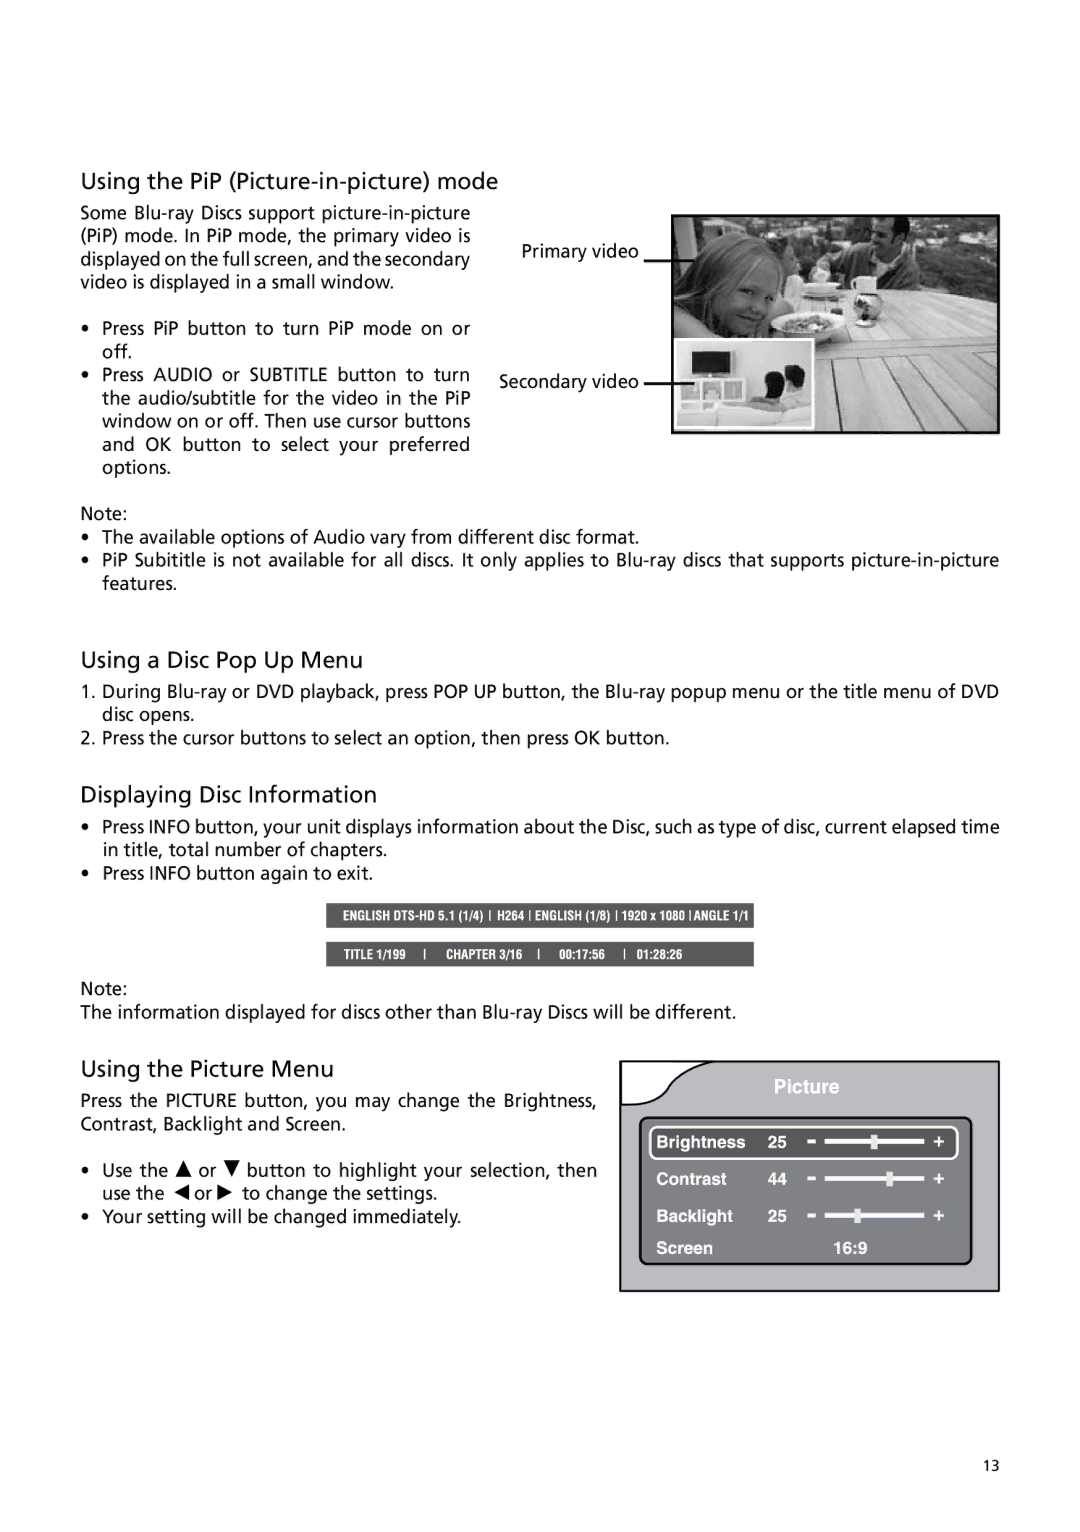 RCA BRC3108 user manual Using the PiP Picture-in-picture mode, Using a Disc Pop Up Menu, Displaying Disc Information 